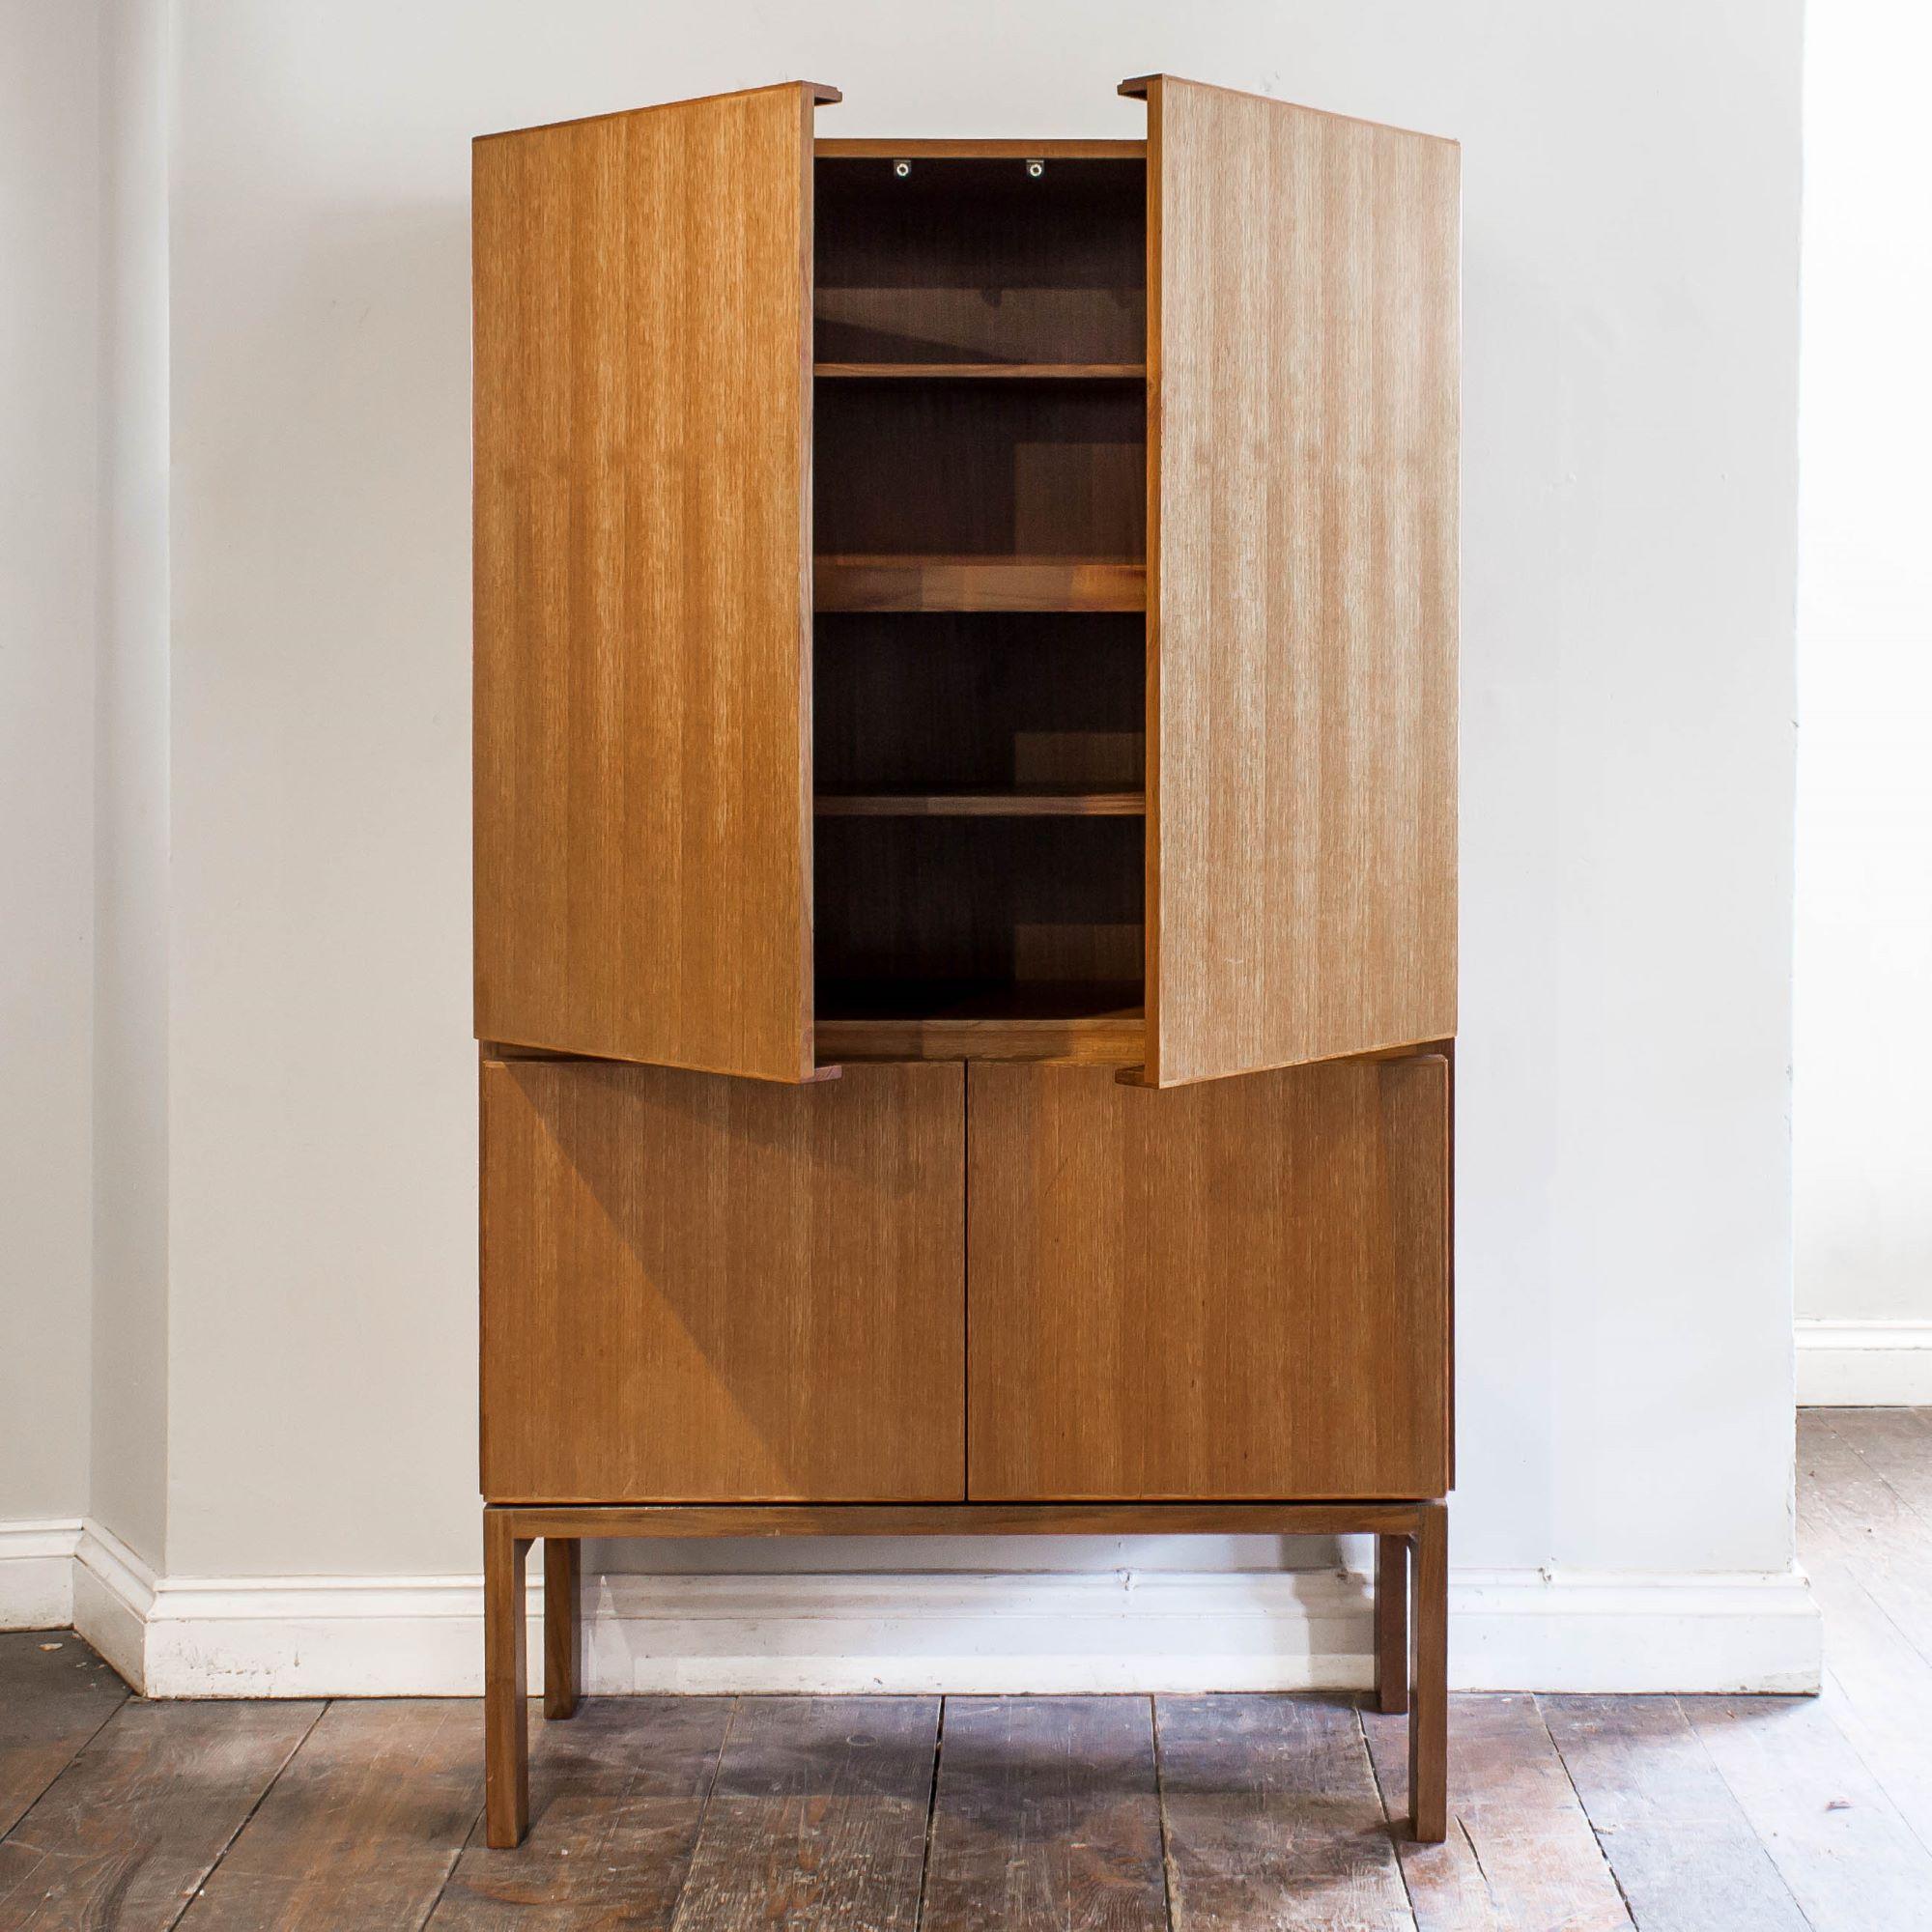 The simple four doors enclosing shelves on simple straight legs.

England, Designed in 1969. This model dates from the 1970s.

Designed as part of the GR69 Series by Robert Heritage for Gordon Russell. This series of furniture was so expensive